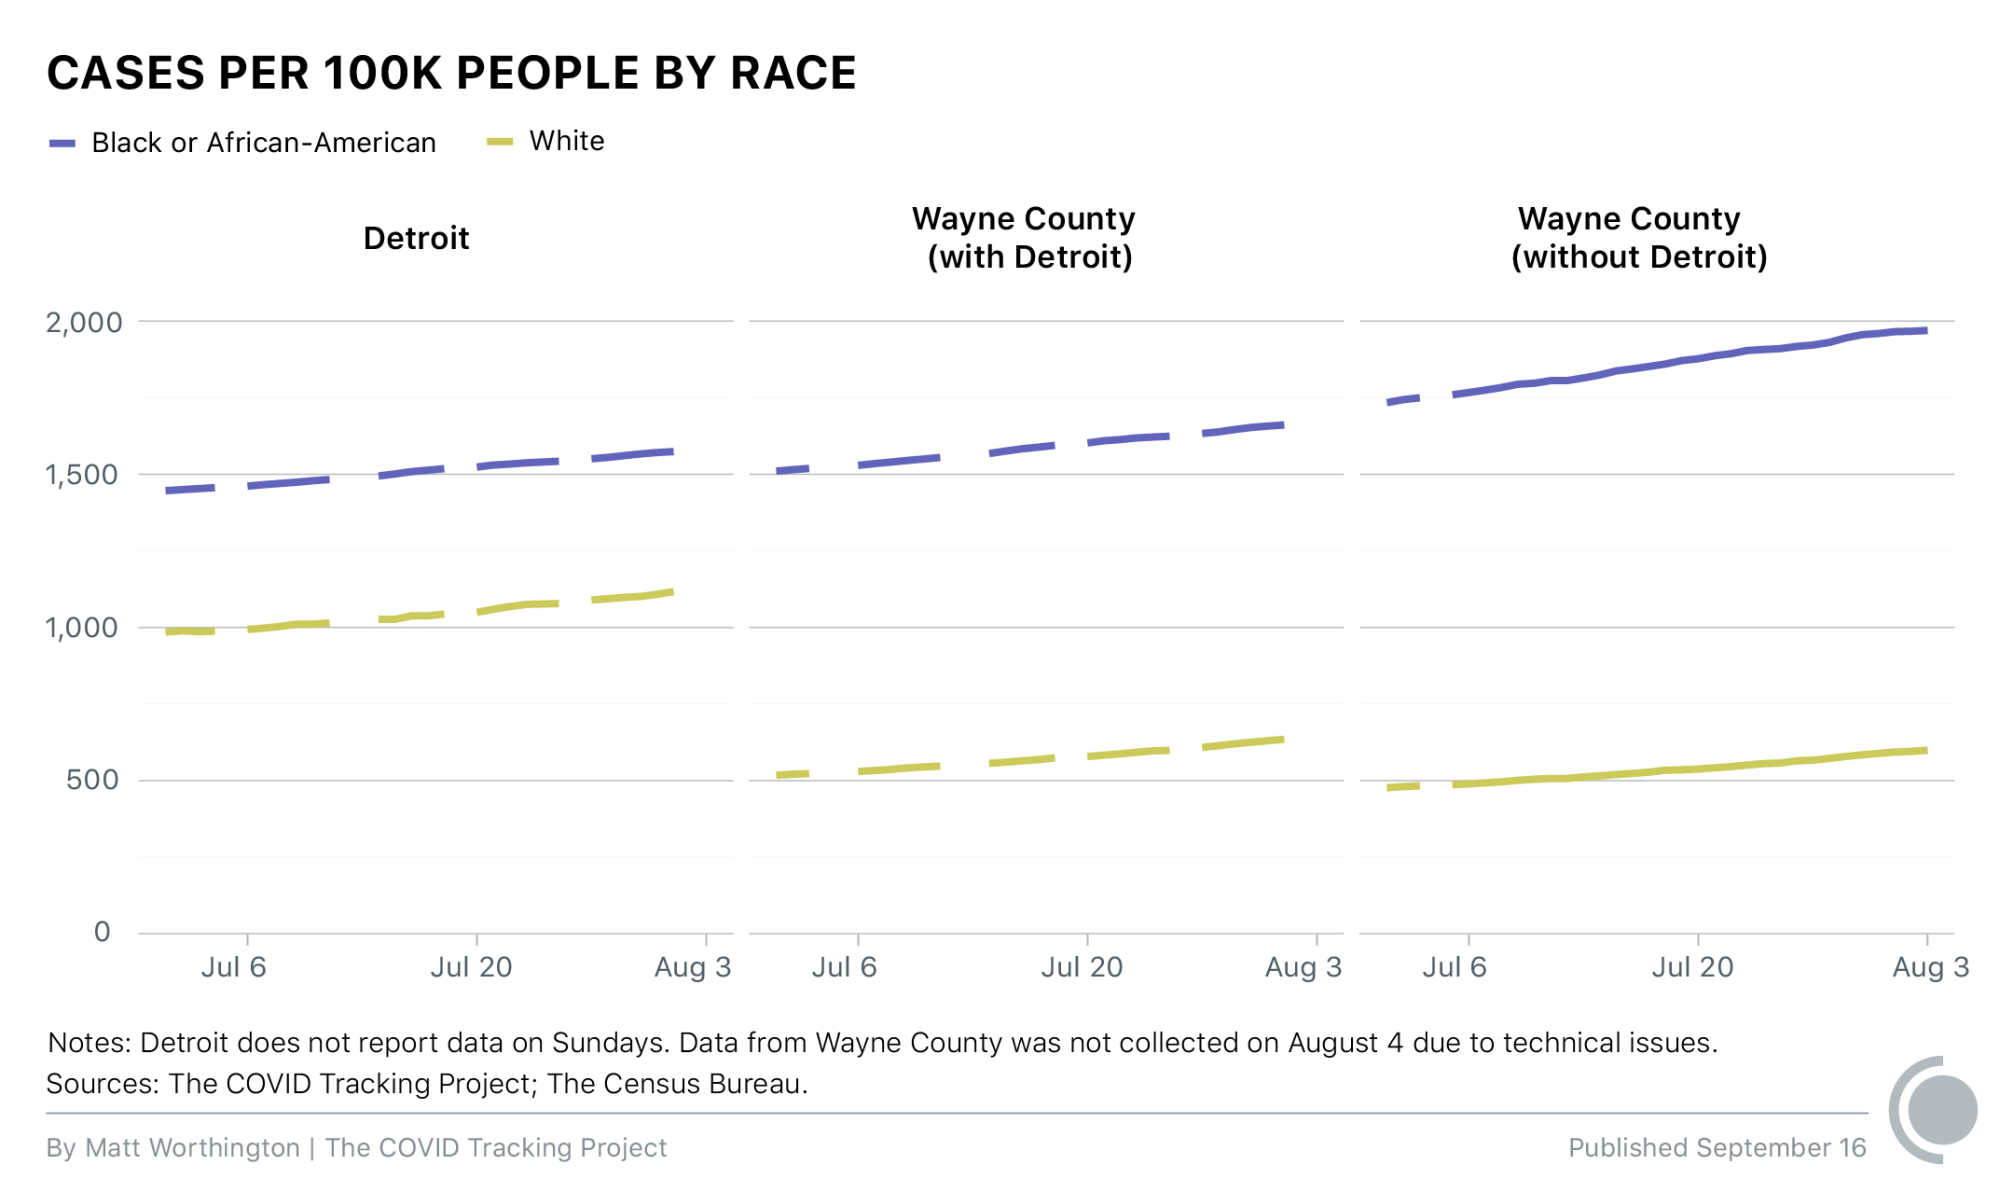 Displays the case rate per 100,000 people for Black or African American people compared to for White people in Detroit, Wayne County with Detroit, and Wayne County without Detroit, from June through August 2020.